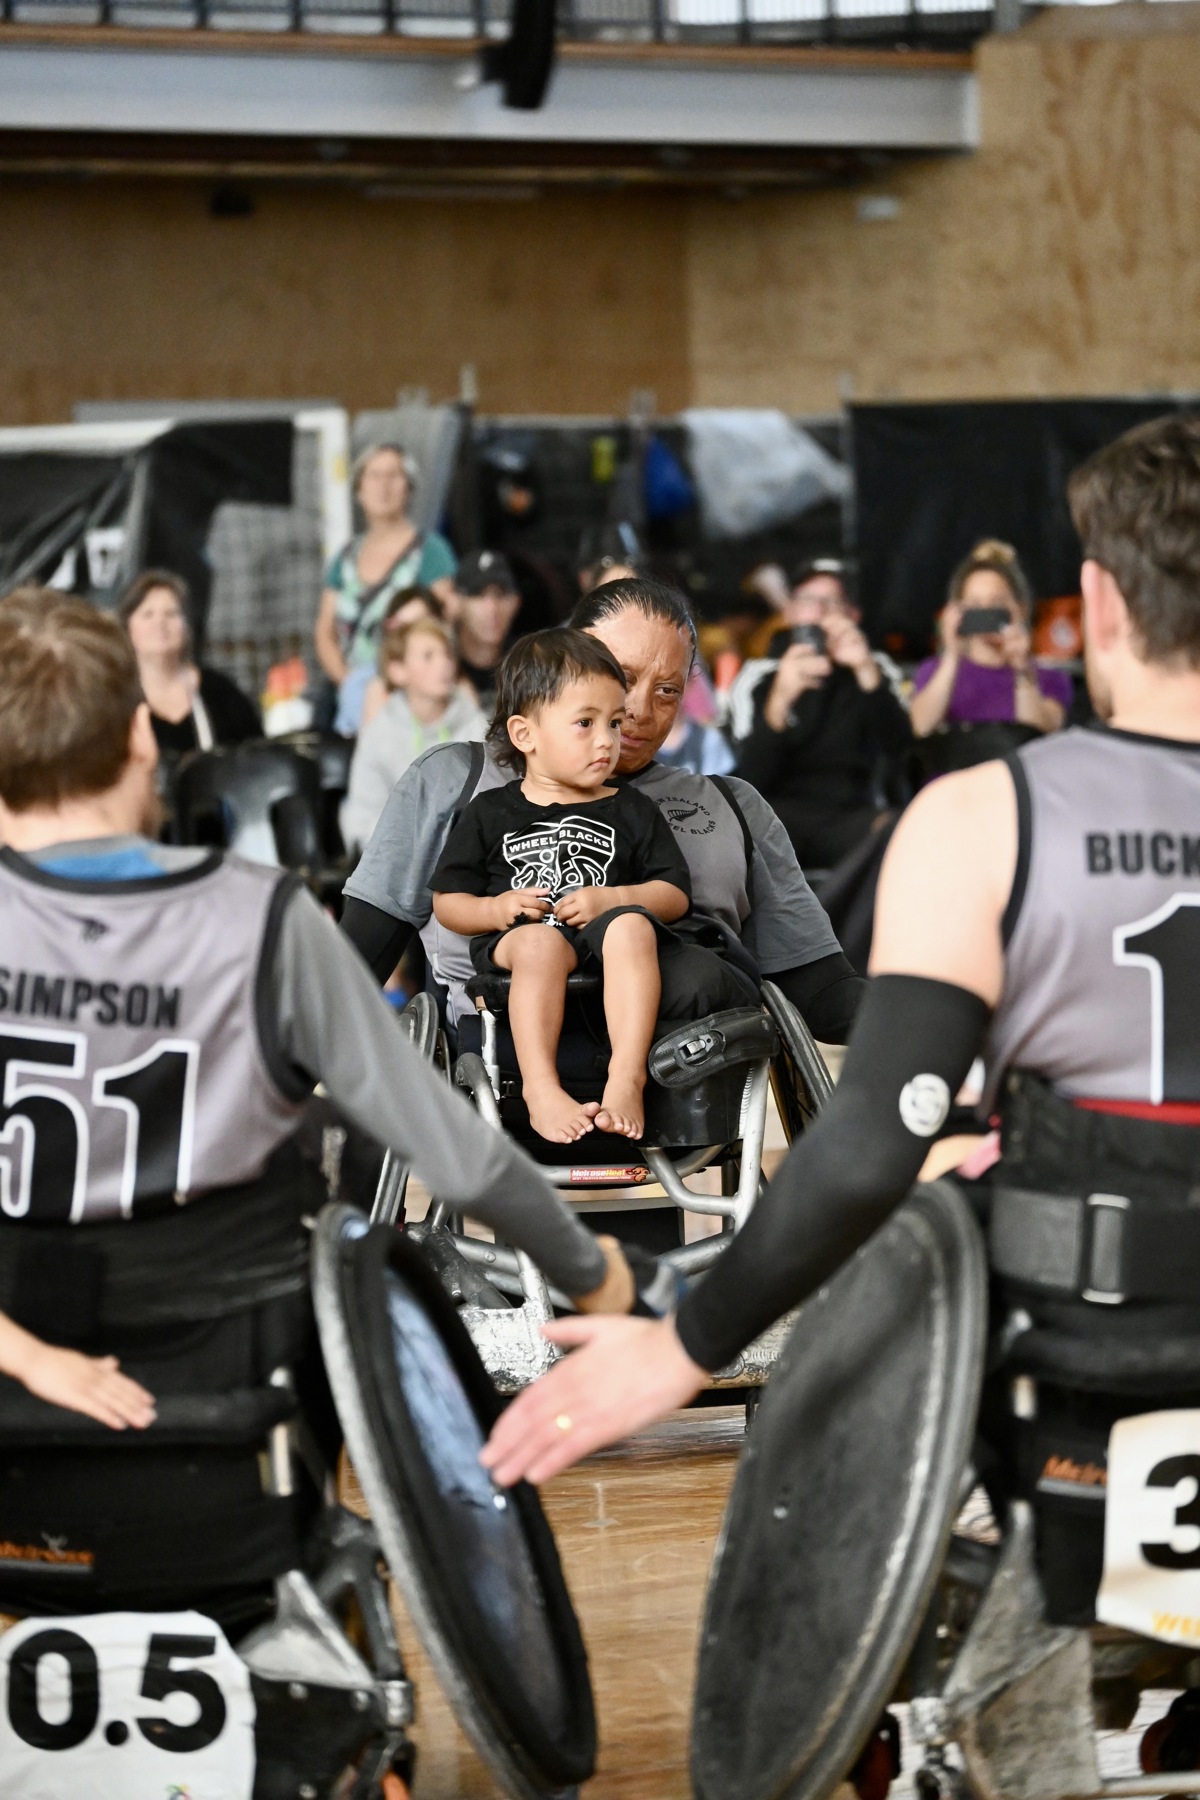 A small child sits on the lap of a wheelchair rugby athlete.